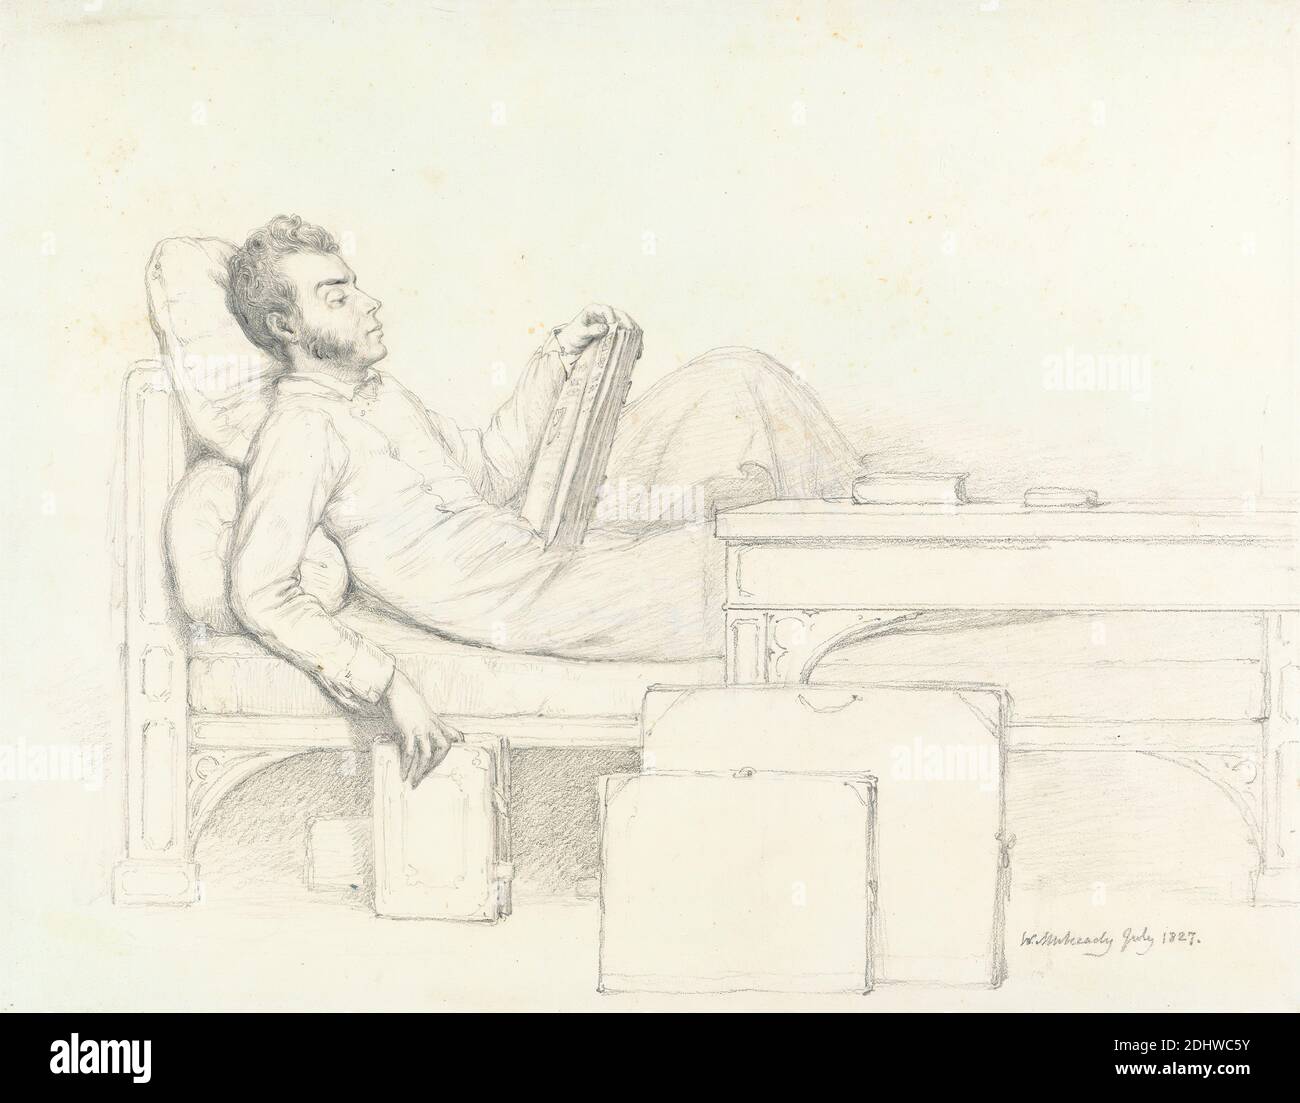 Self-Portrait of the Artist Reclining on a Gothic Couch Reading a Book, William Mulready, 1786–1863, Irish, 1827, Graphite on medium, slightly textured, cream wove paper, Sheet: 8 5/8 × 11 inches (21.9 × 27.9 cm), artist, books, couch, decorative arts, furniture, Gothic decorative arts, hair, man, pillows, portfolios (containers), portrait, self-portrait, shirt, sketchpads, table, waistcoat Stock Photo